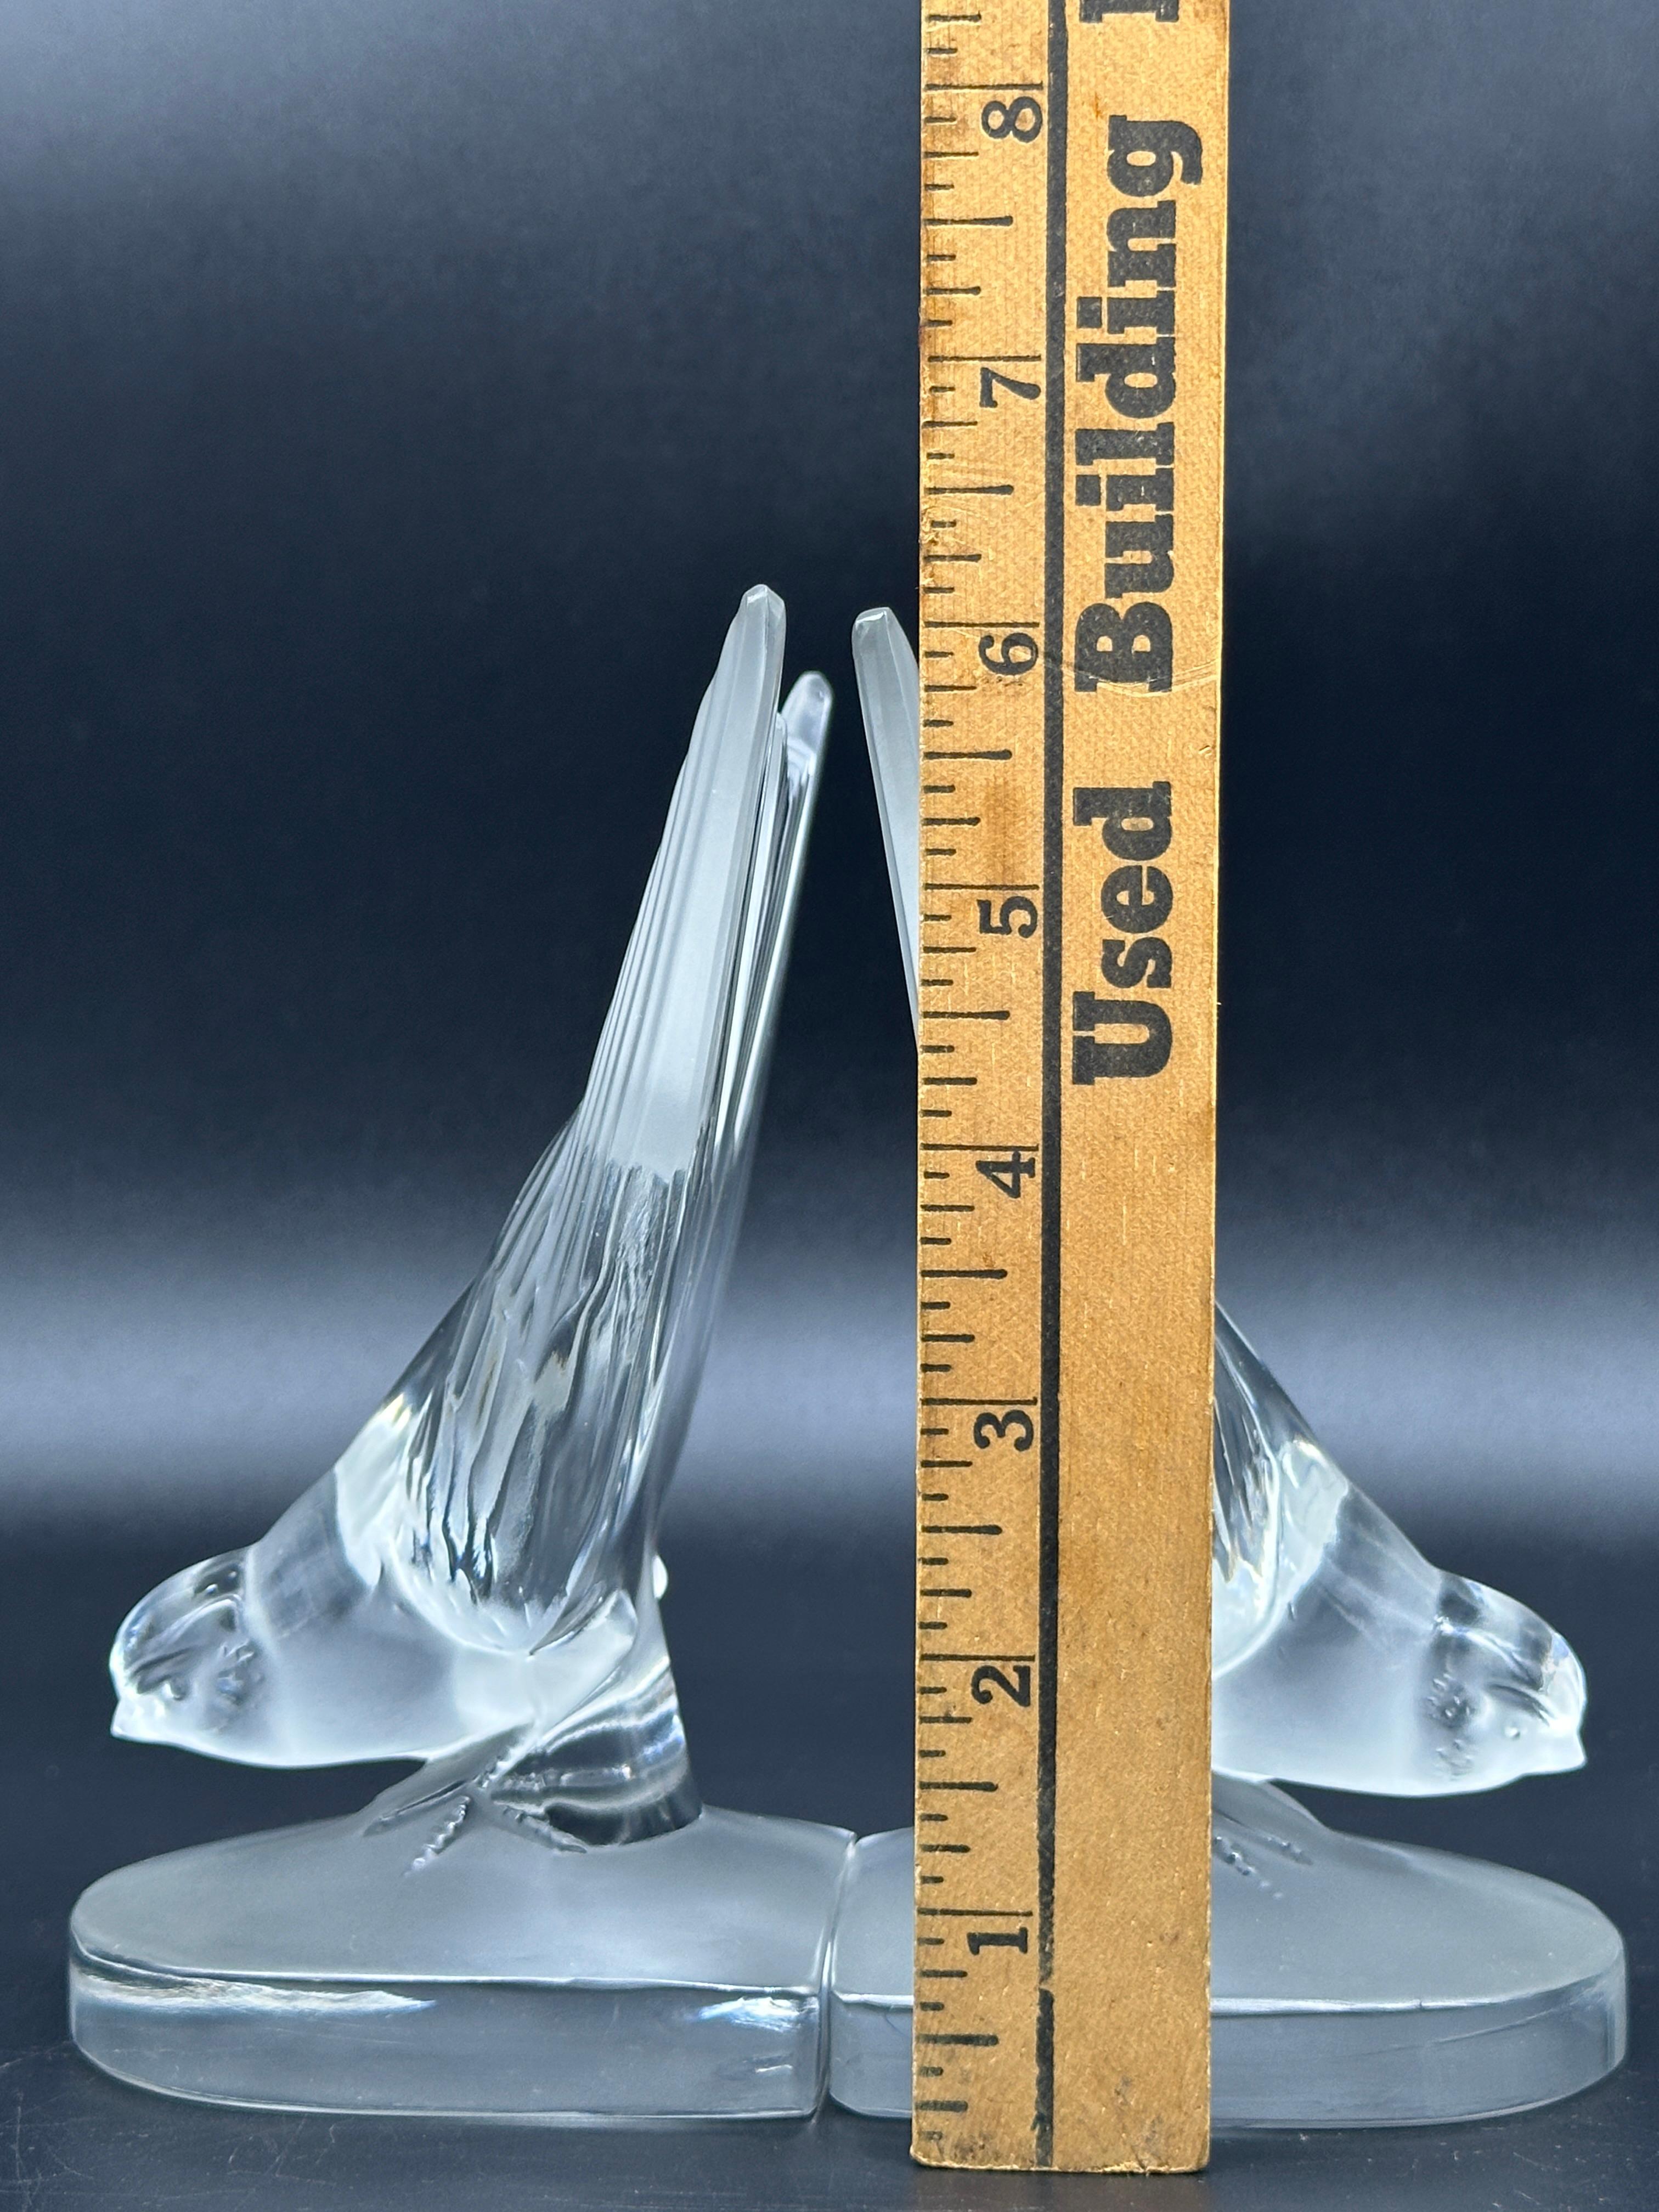 Pair of Vintage Lalique Crystal Hirondelle Swallow Bird Bookends